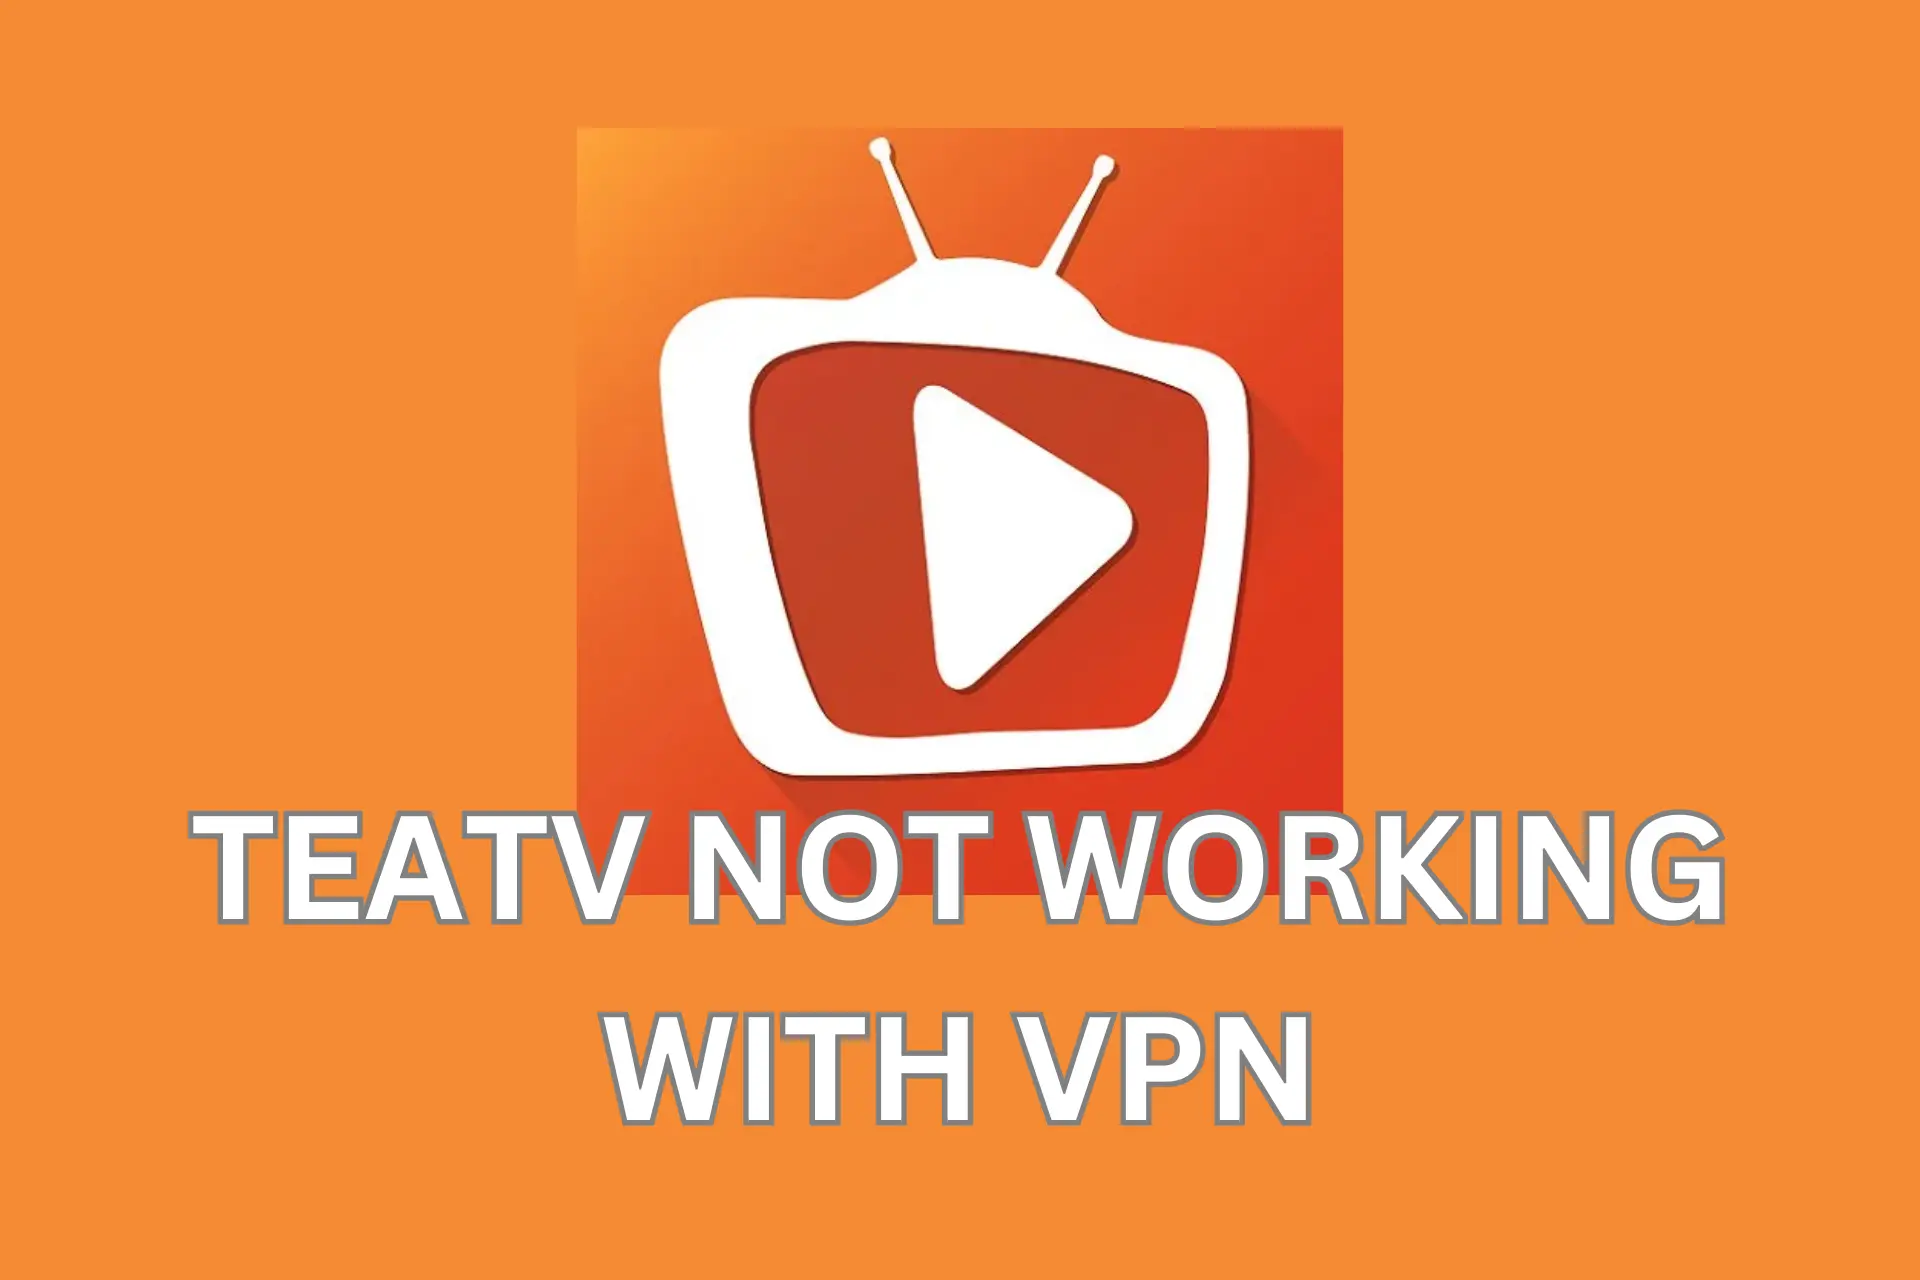 teatv not working with vpn